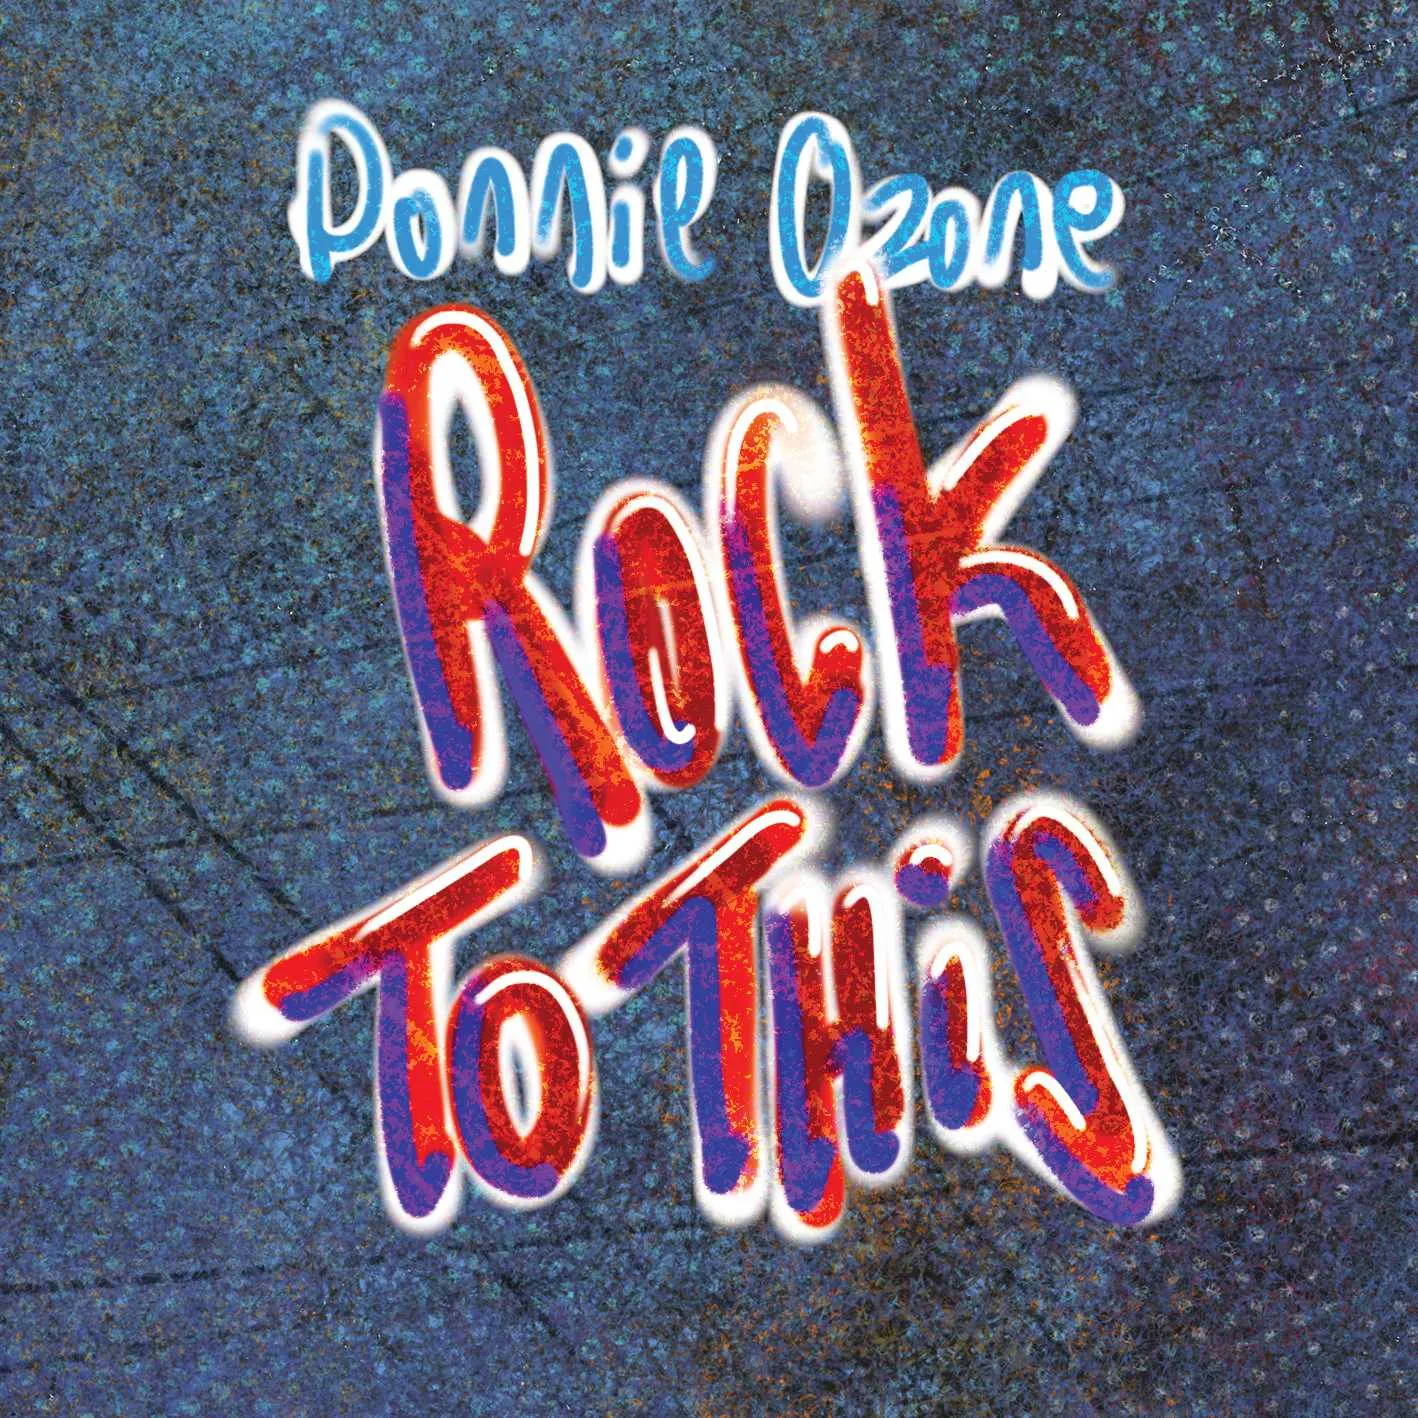 Album cover for “Rock To This” by Donnie Ozone